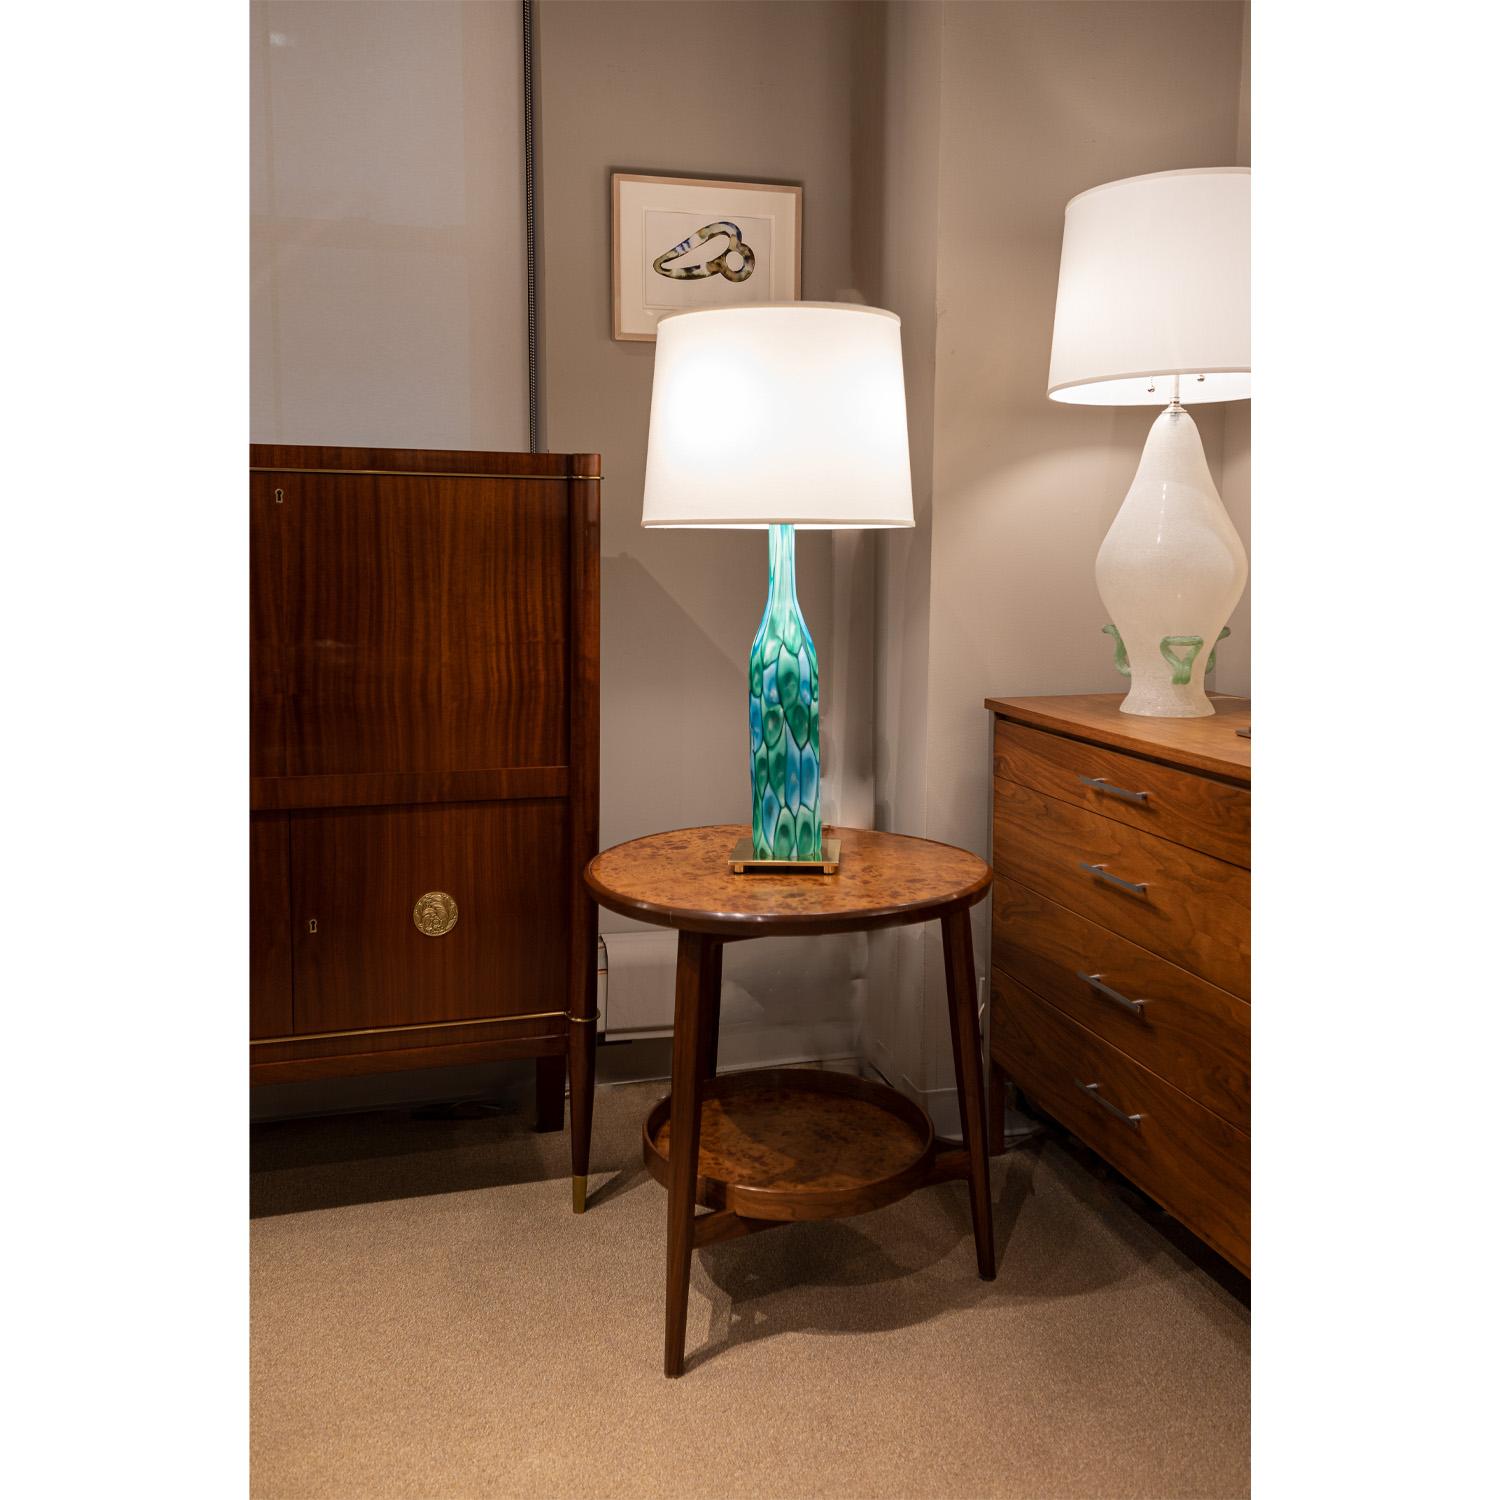 Fratelli Toso Art Glass Table Lamp with Green and Blue Murrhines, 1959 In Excellent Condition For Sale In New York, NY